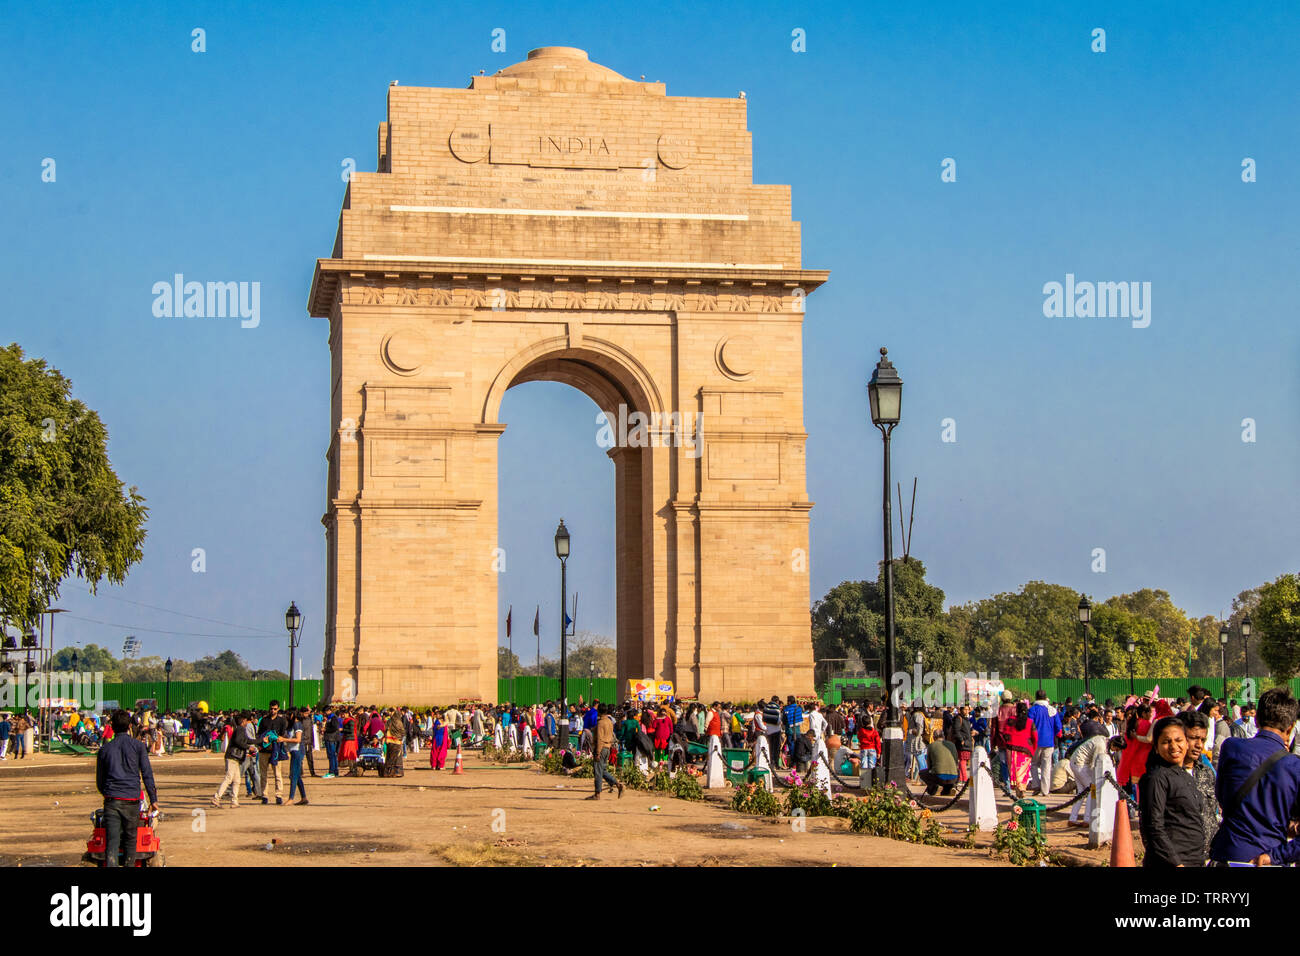 New Delhi, India - February , 2019. The India Gate in New Delhi. India Gate is a war memorial to 82,000 soldiers of the undivided Indian Army who died Stock Photo